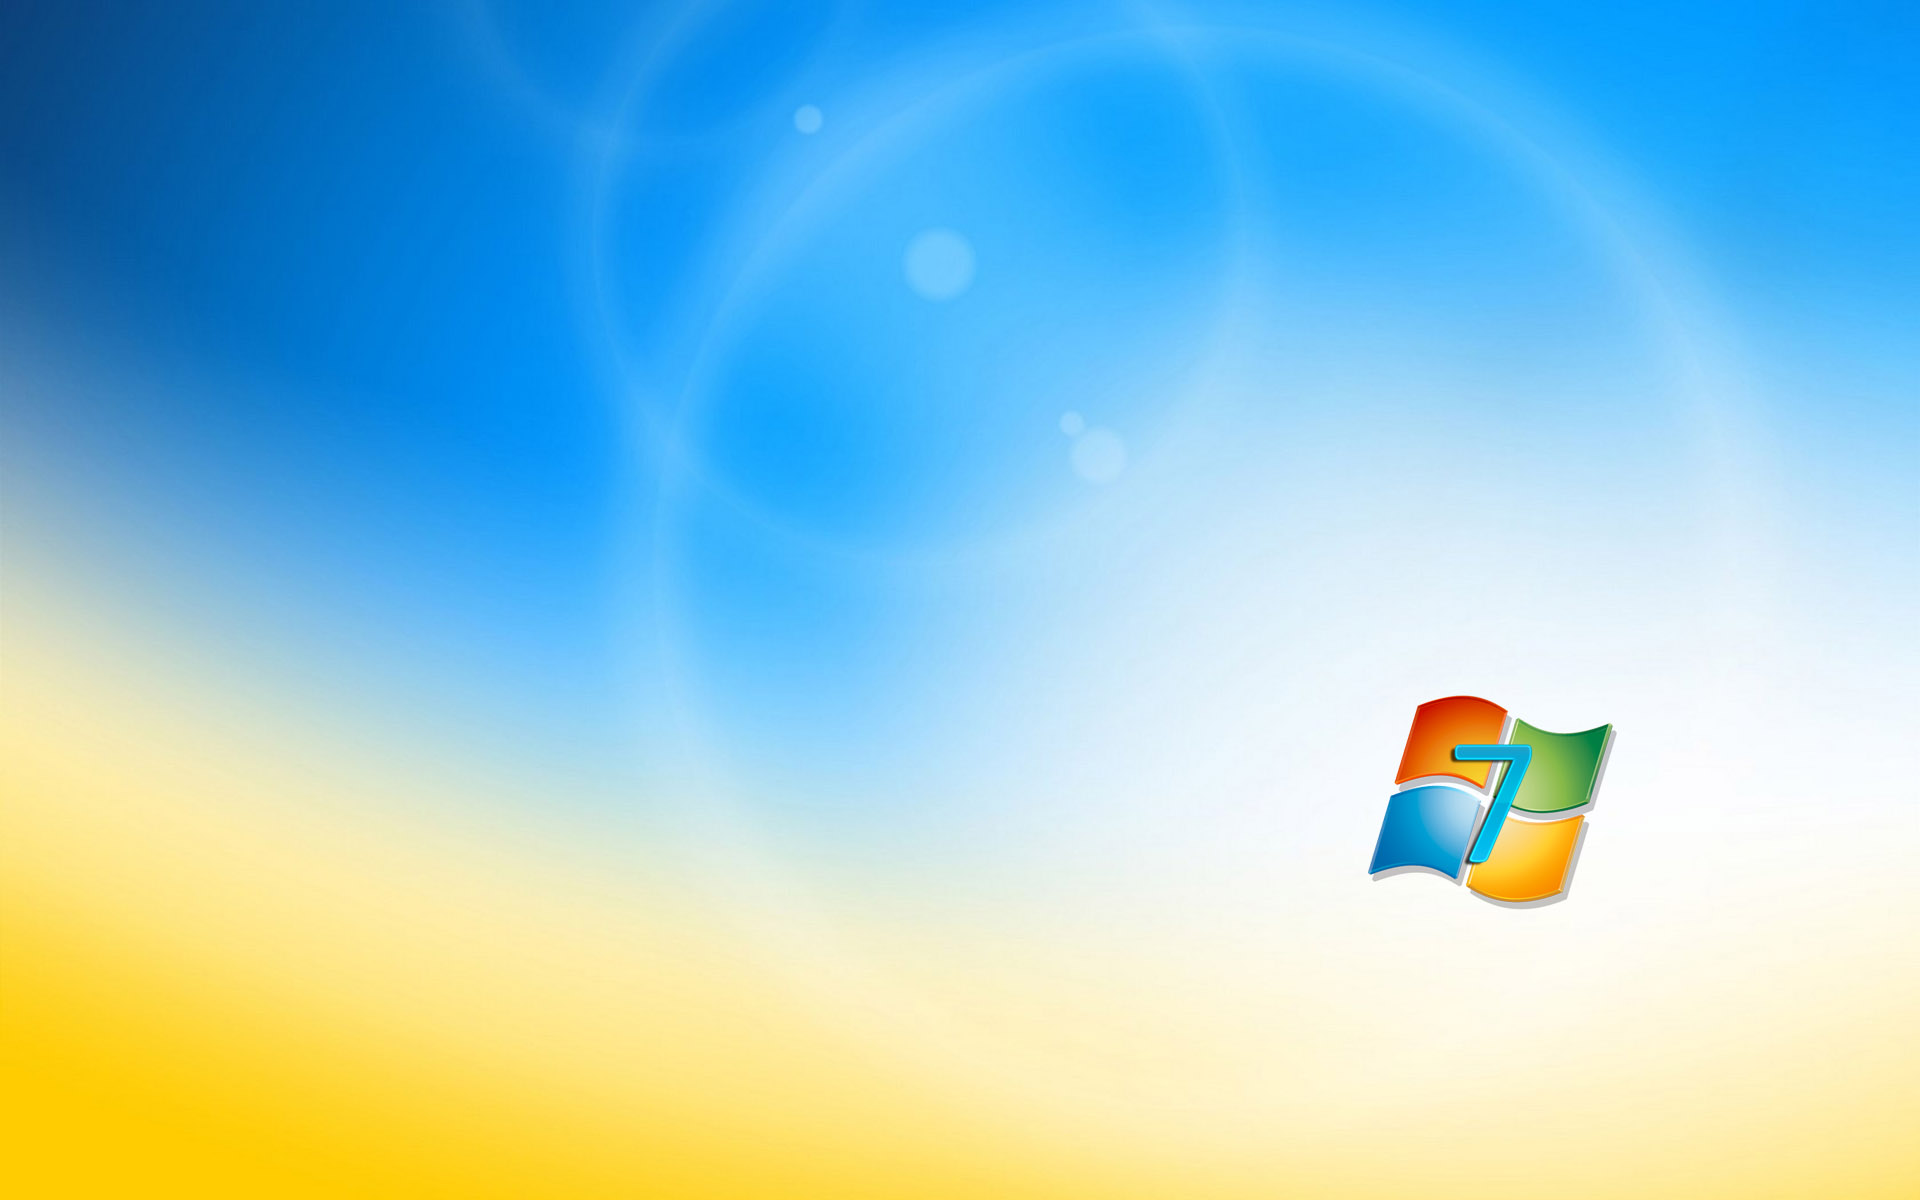 Windows 7 images Windows 7 Free Background HD wallpaper and background